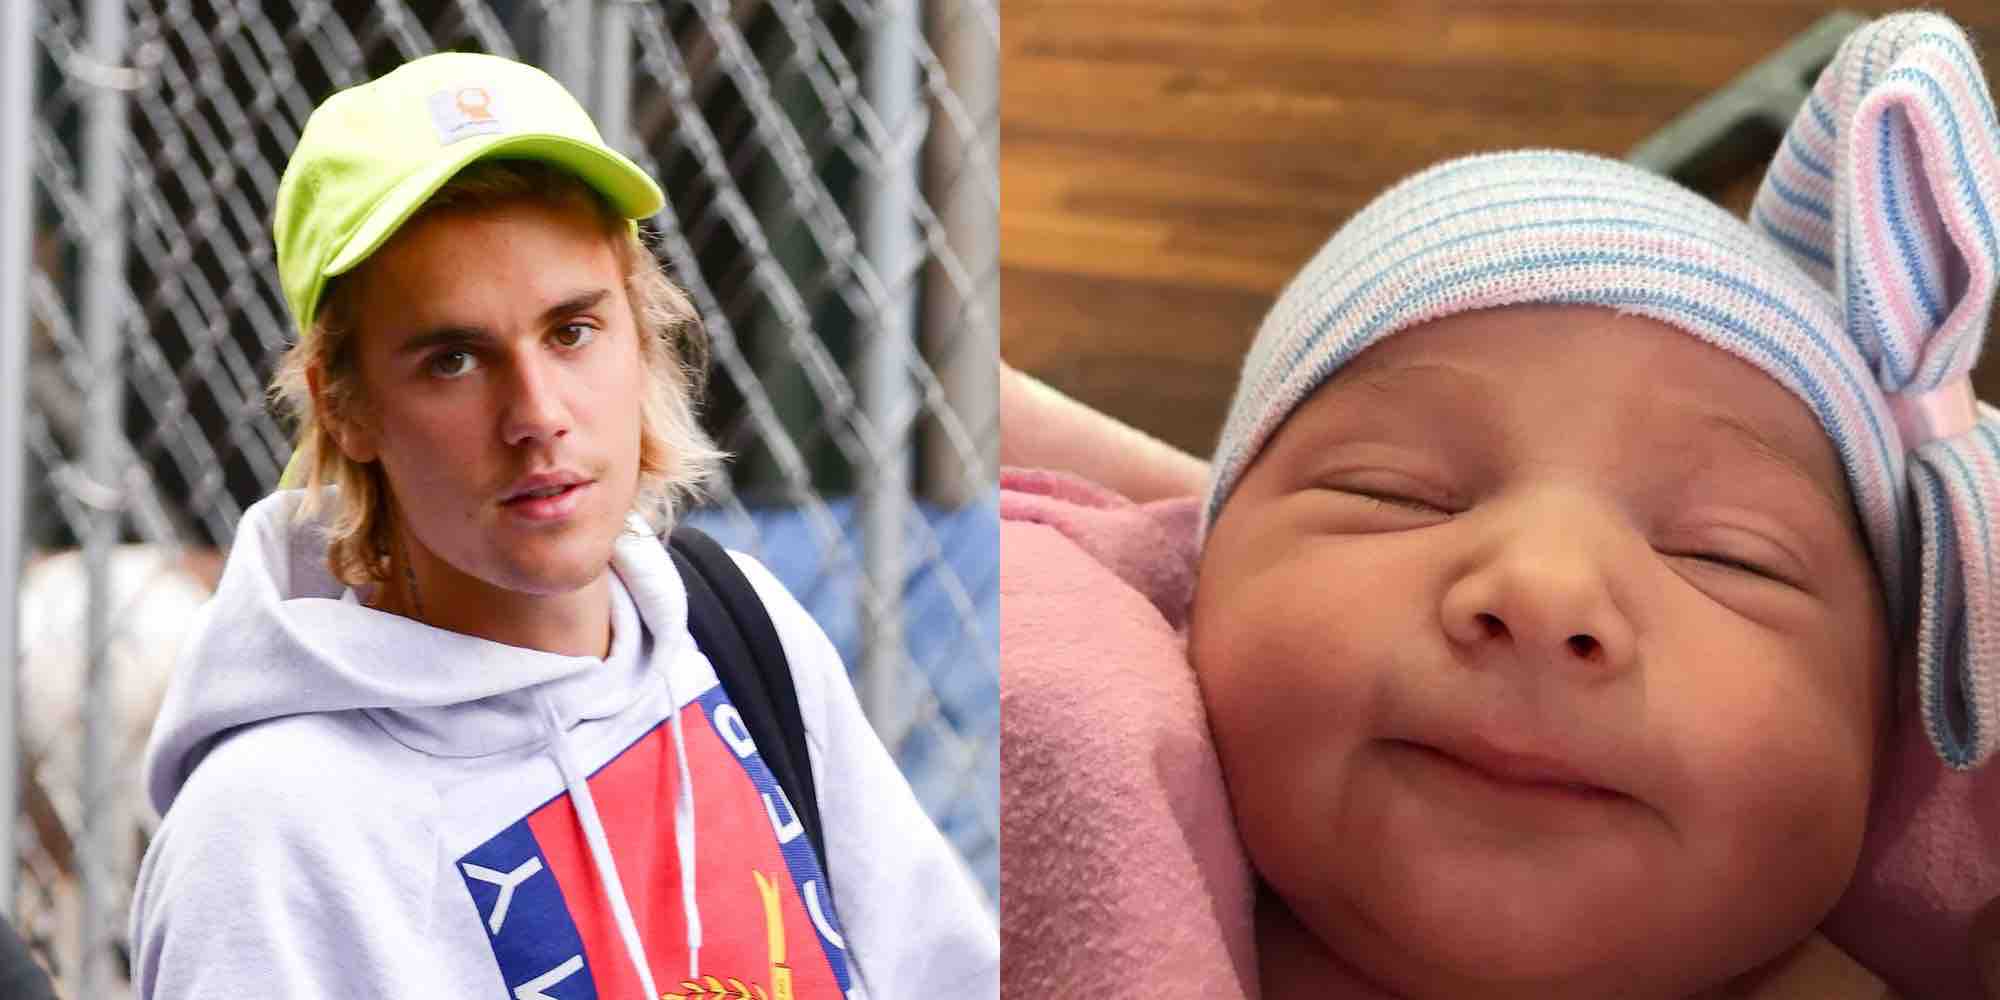 Justin Bieber Introduces the World to His New Baby Sister ...